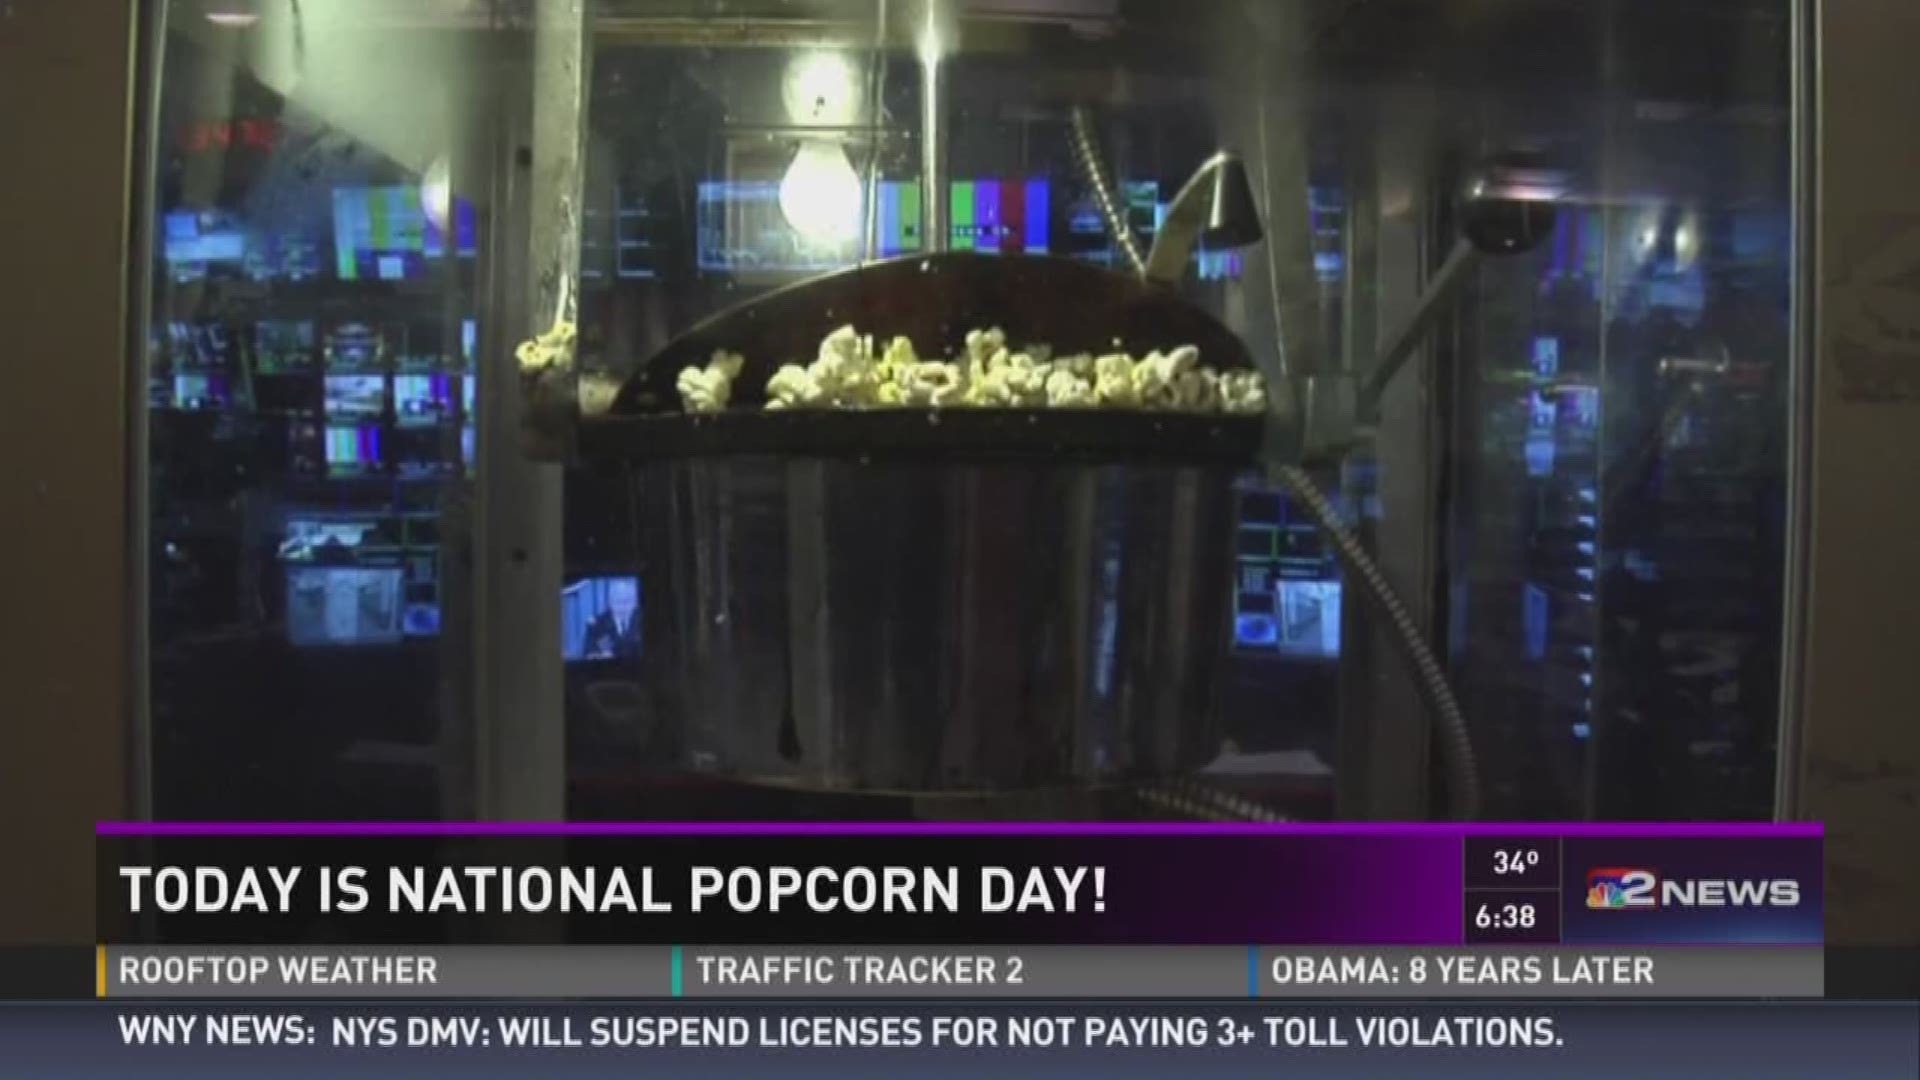 The Daybreak crew celebrates National Popcorn Day on Thursday! Popcorn is half off at all Regal Cinemas today.